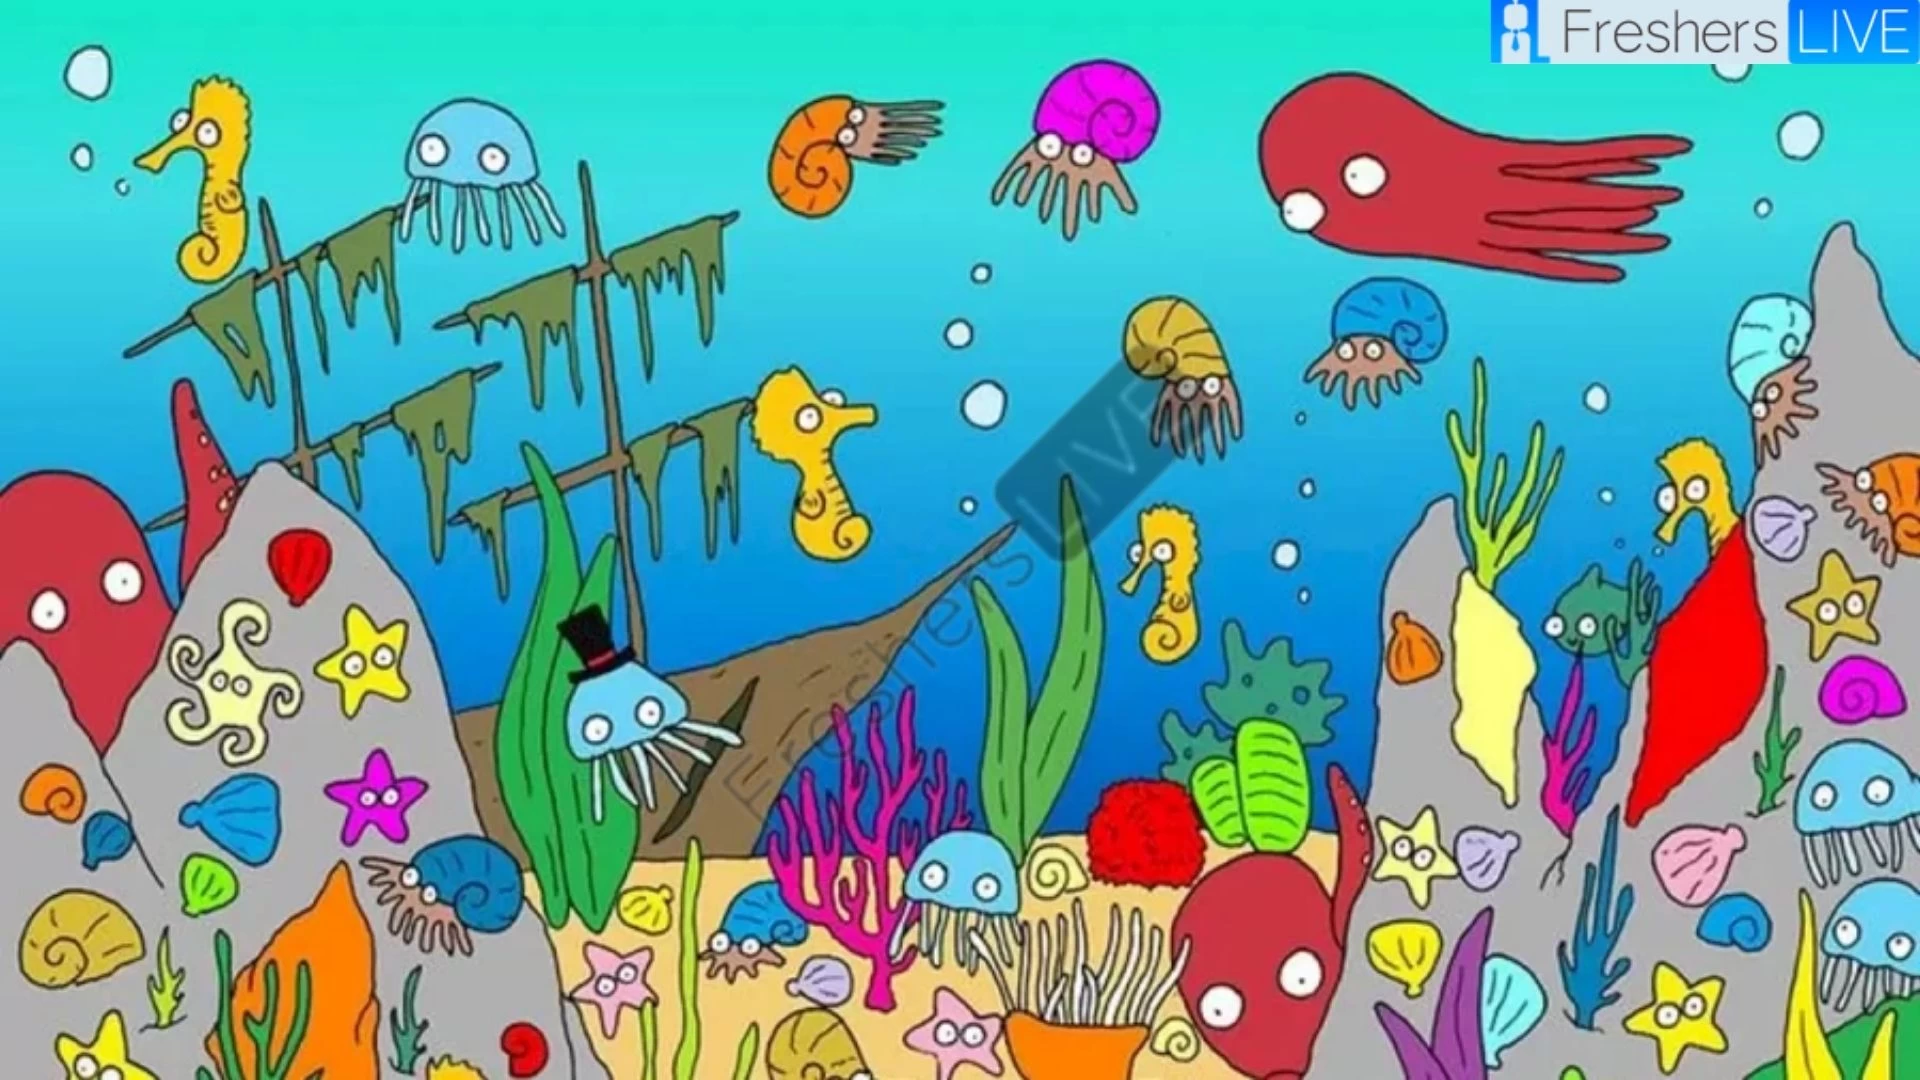 Look for Fish!  Can You Spot Fish In This Aquarium Picture In Less Than 10 Seconds?